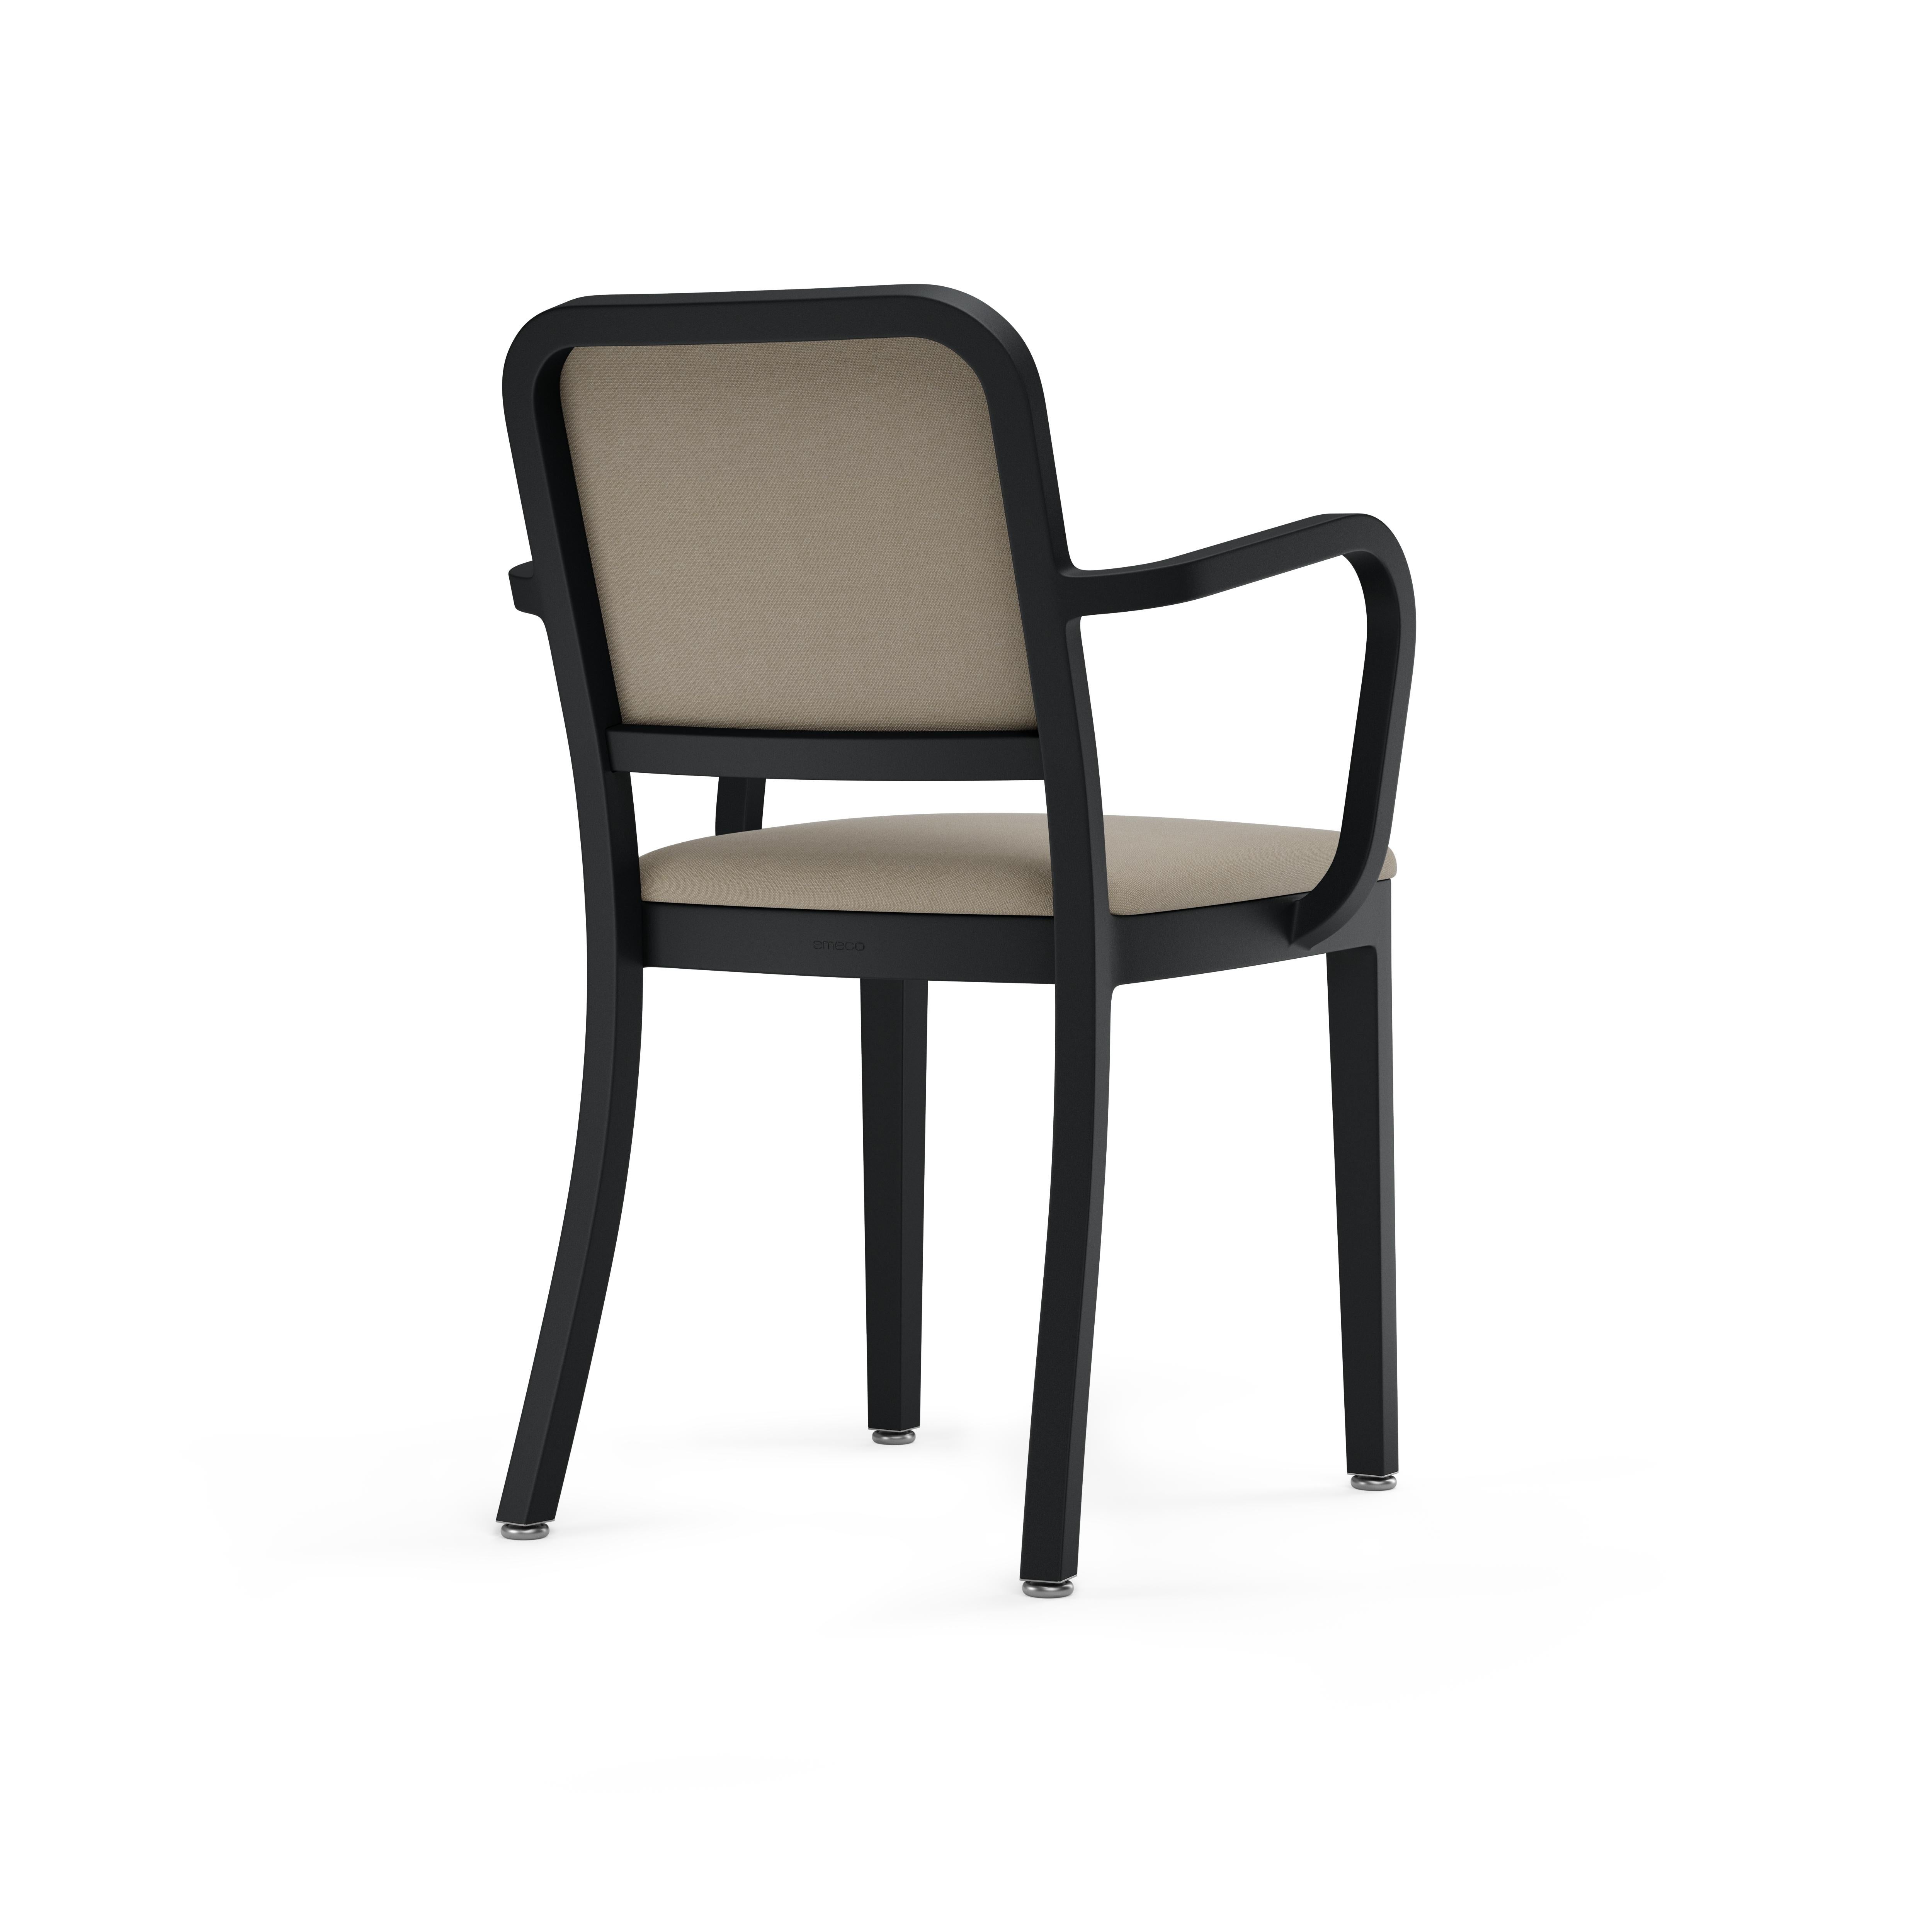 Jasper Morrison has given Emeco’s classic upholstered Navy Officer Collection a fresh, light and modern update. The Navy Officer Collection by Jasper Morrison features a chair, an armchair and swivel chairs, available in hand-brushed aluminum or a